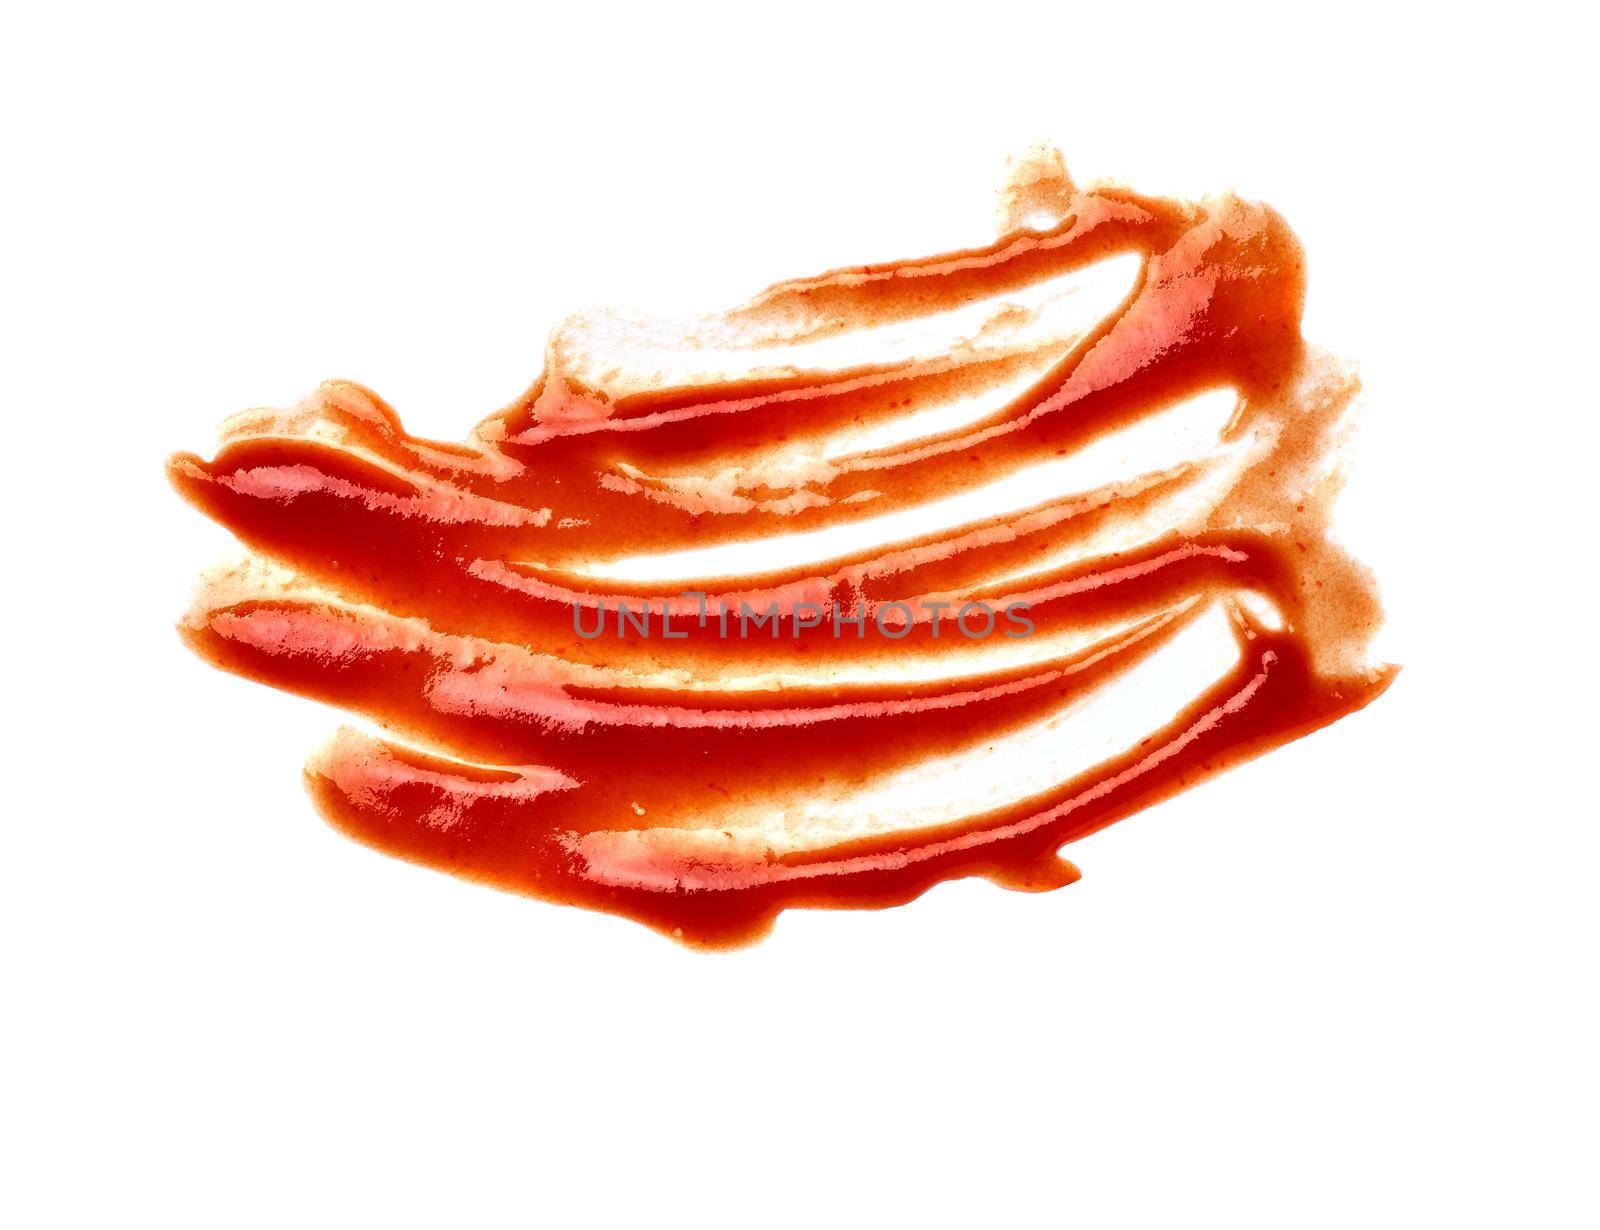 close up of a ketchup stain on white background